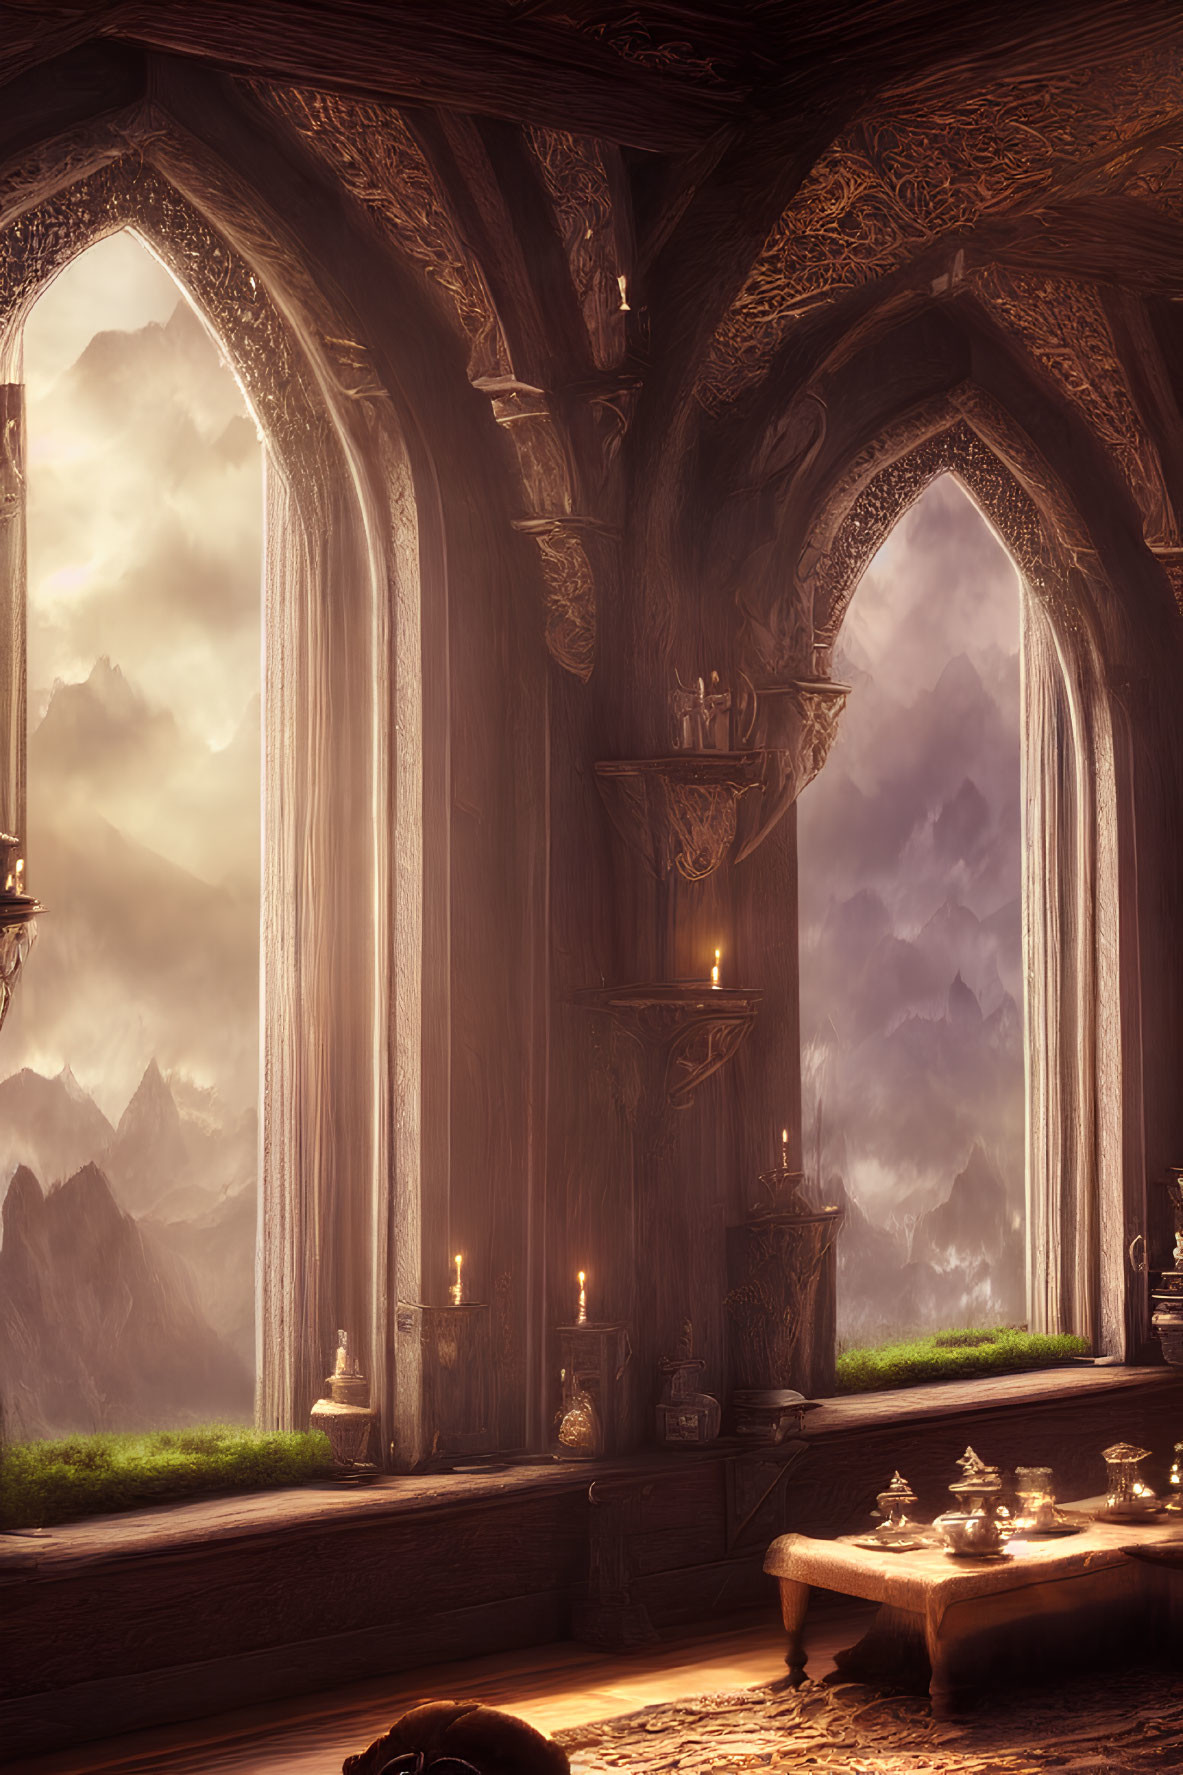 Fantasy Hall with Arched Windows and Mountain View